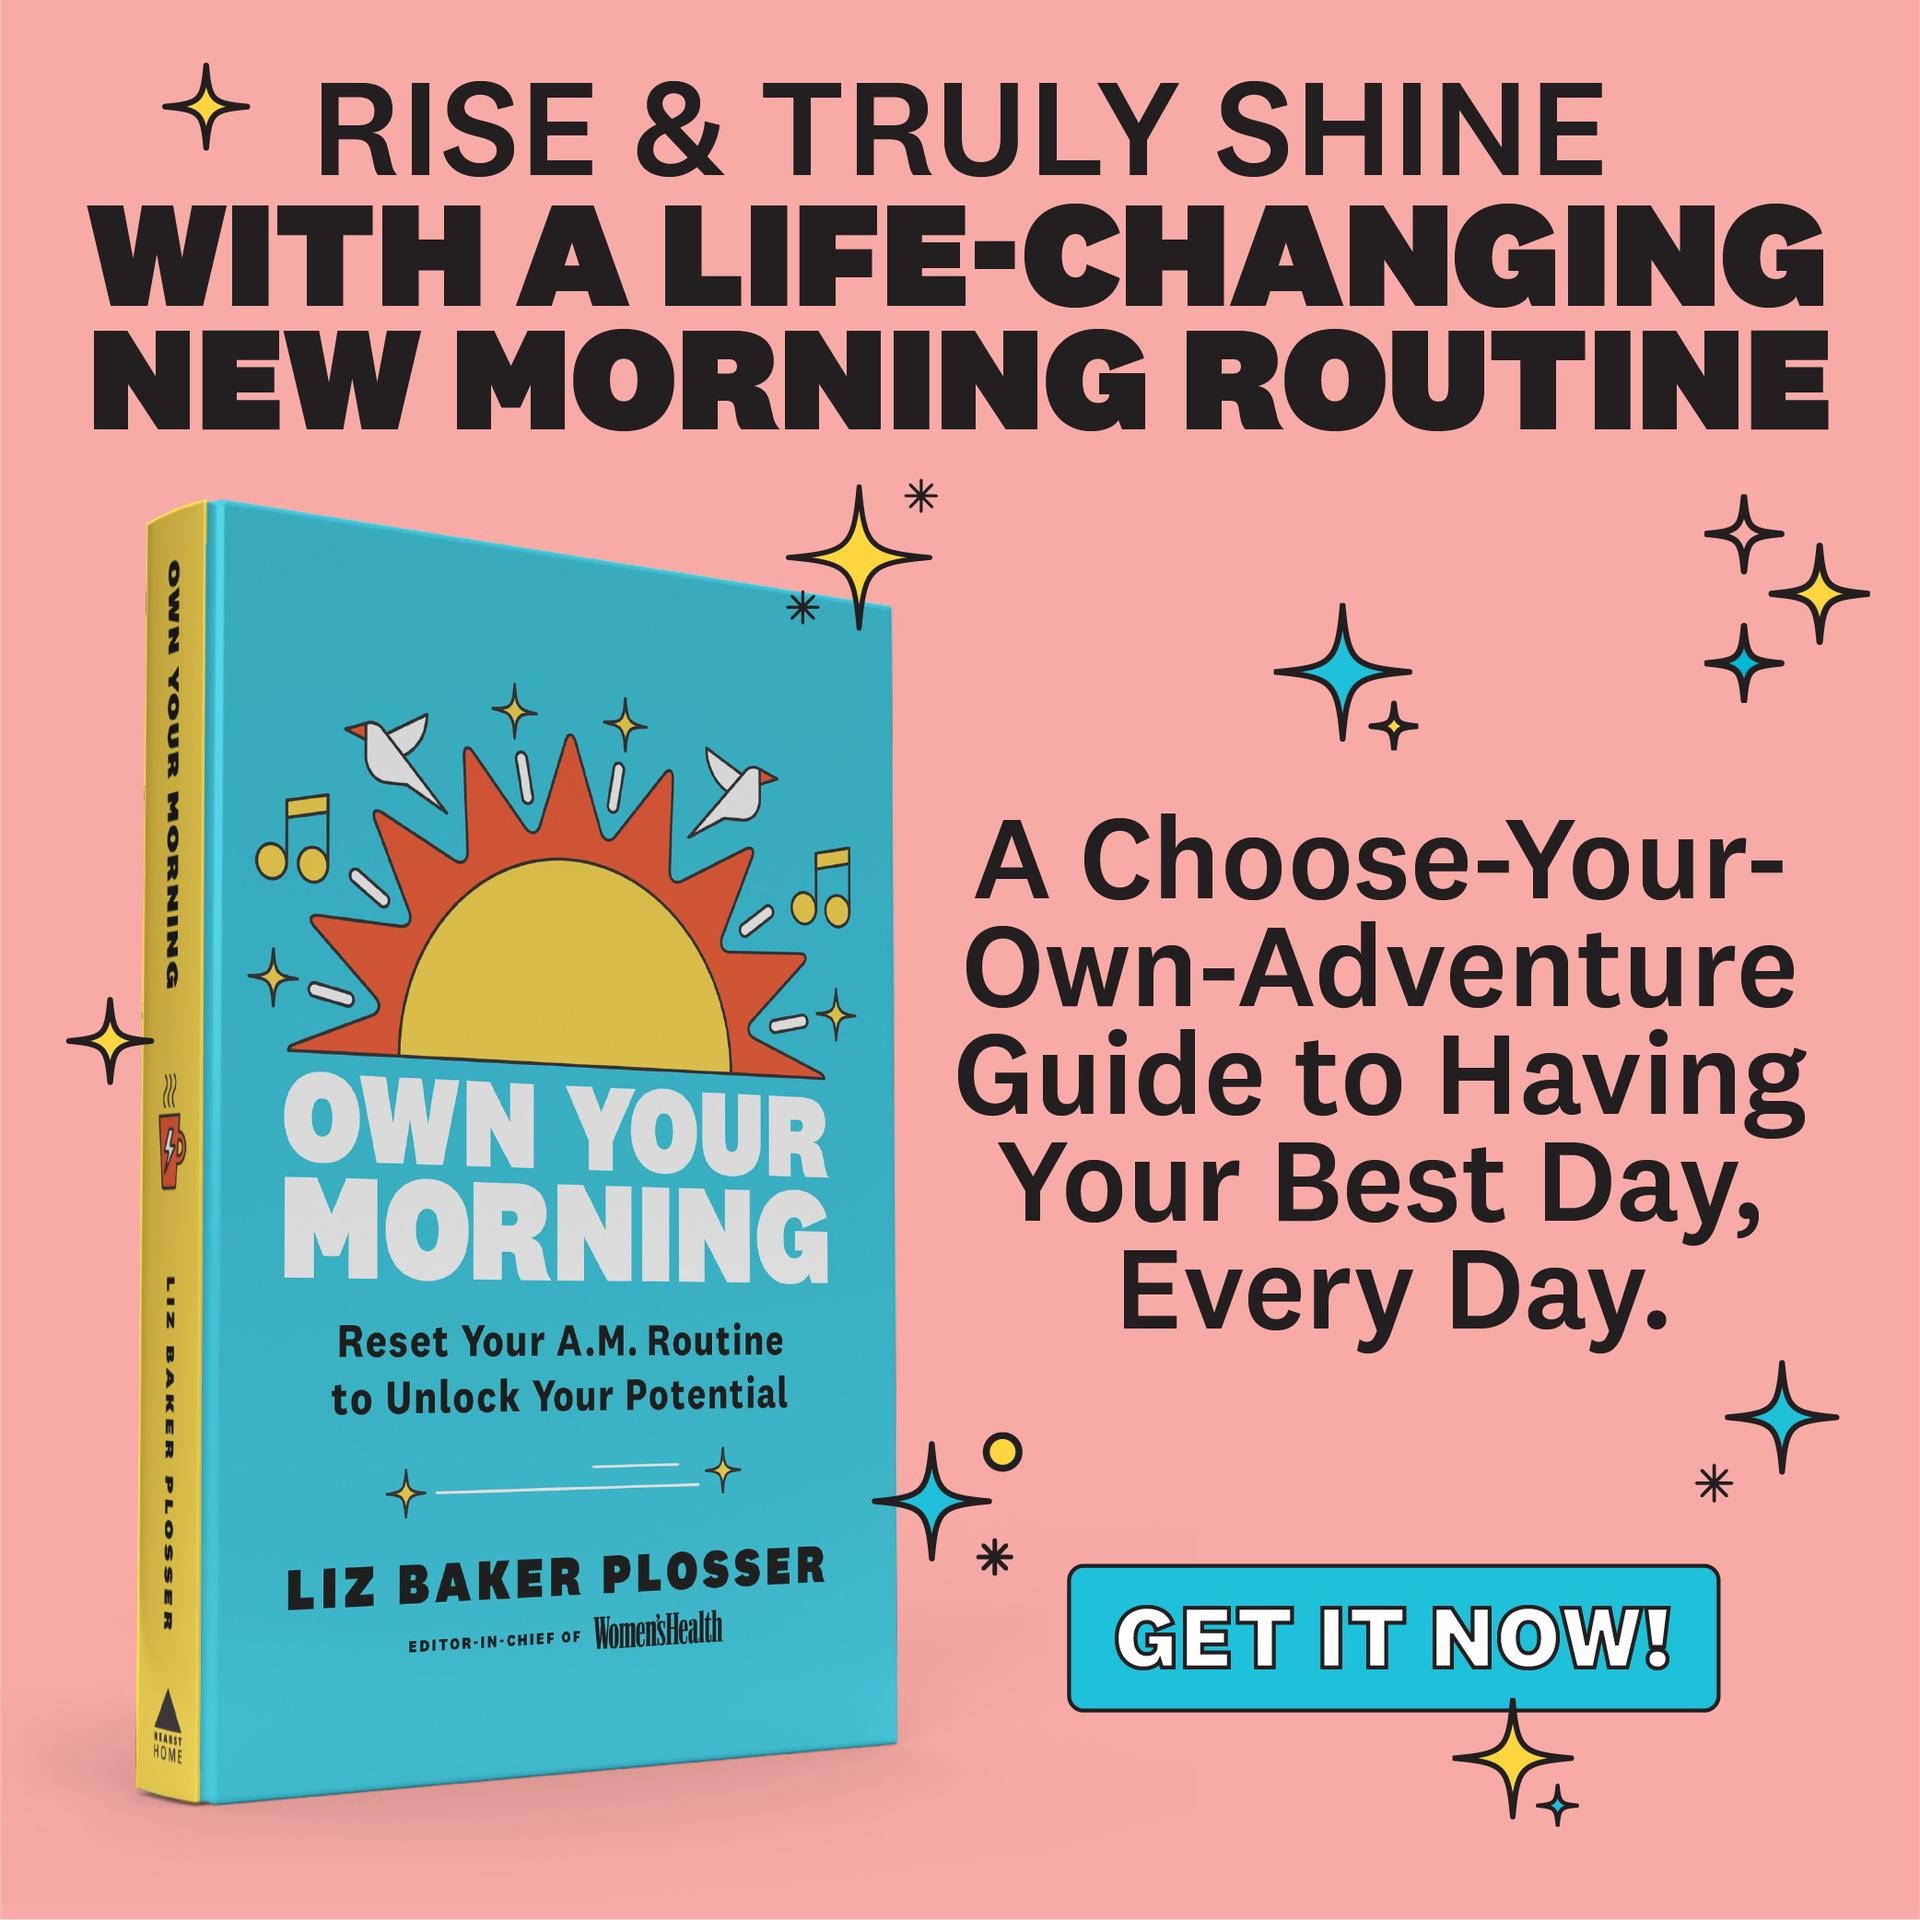 Rise and Truly Shine With a Life-Changing New Morning Routine. A Choose-Your-Own-Adventure Guide to Having Your Best Day, Every Day